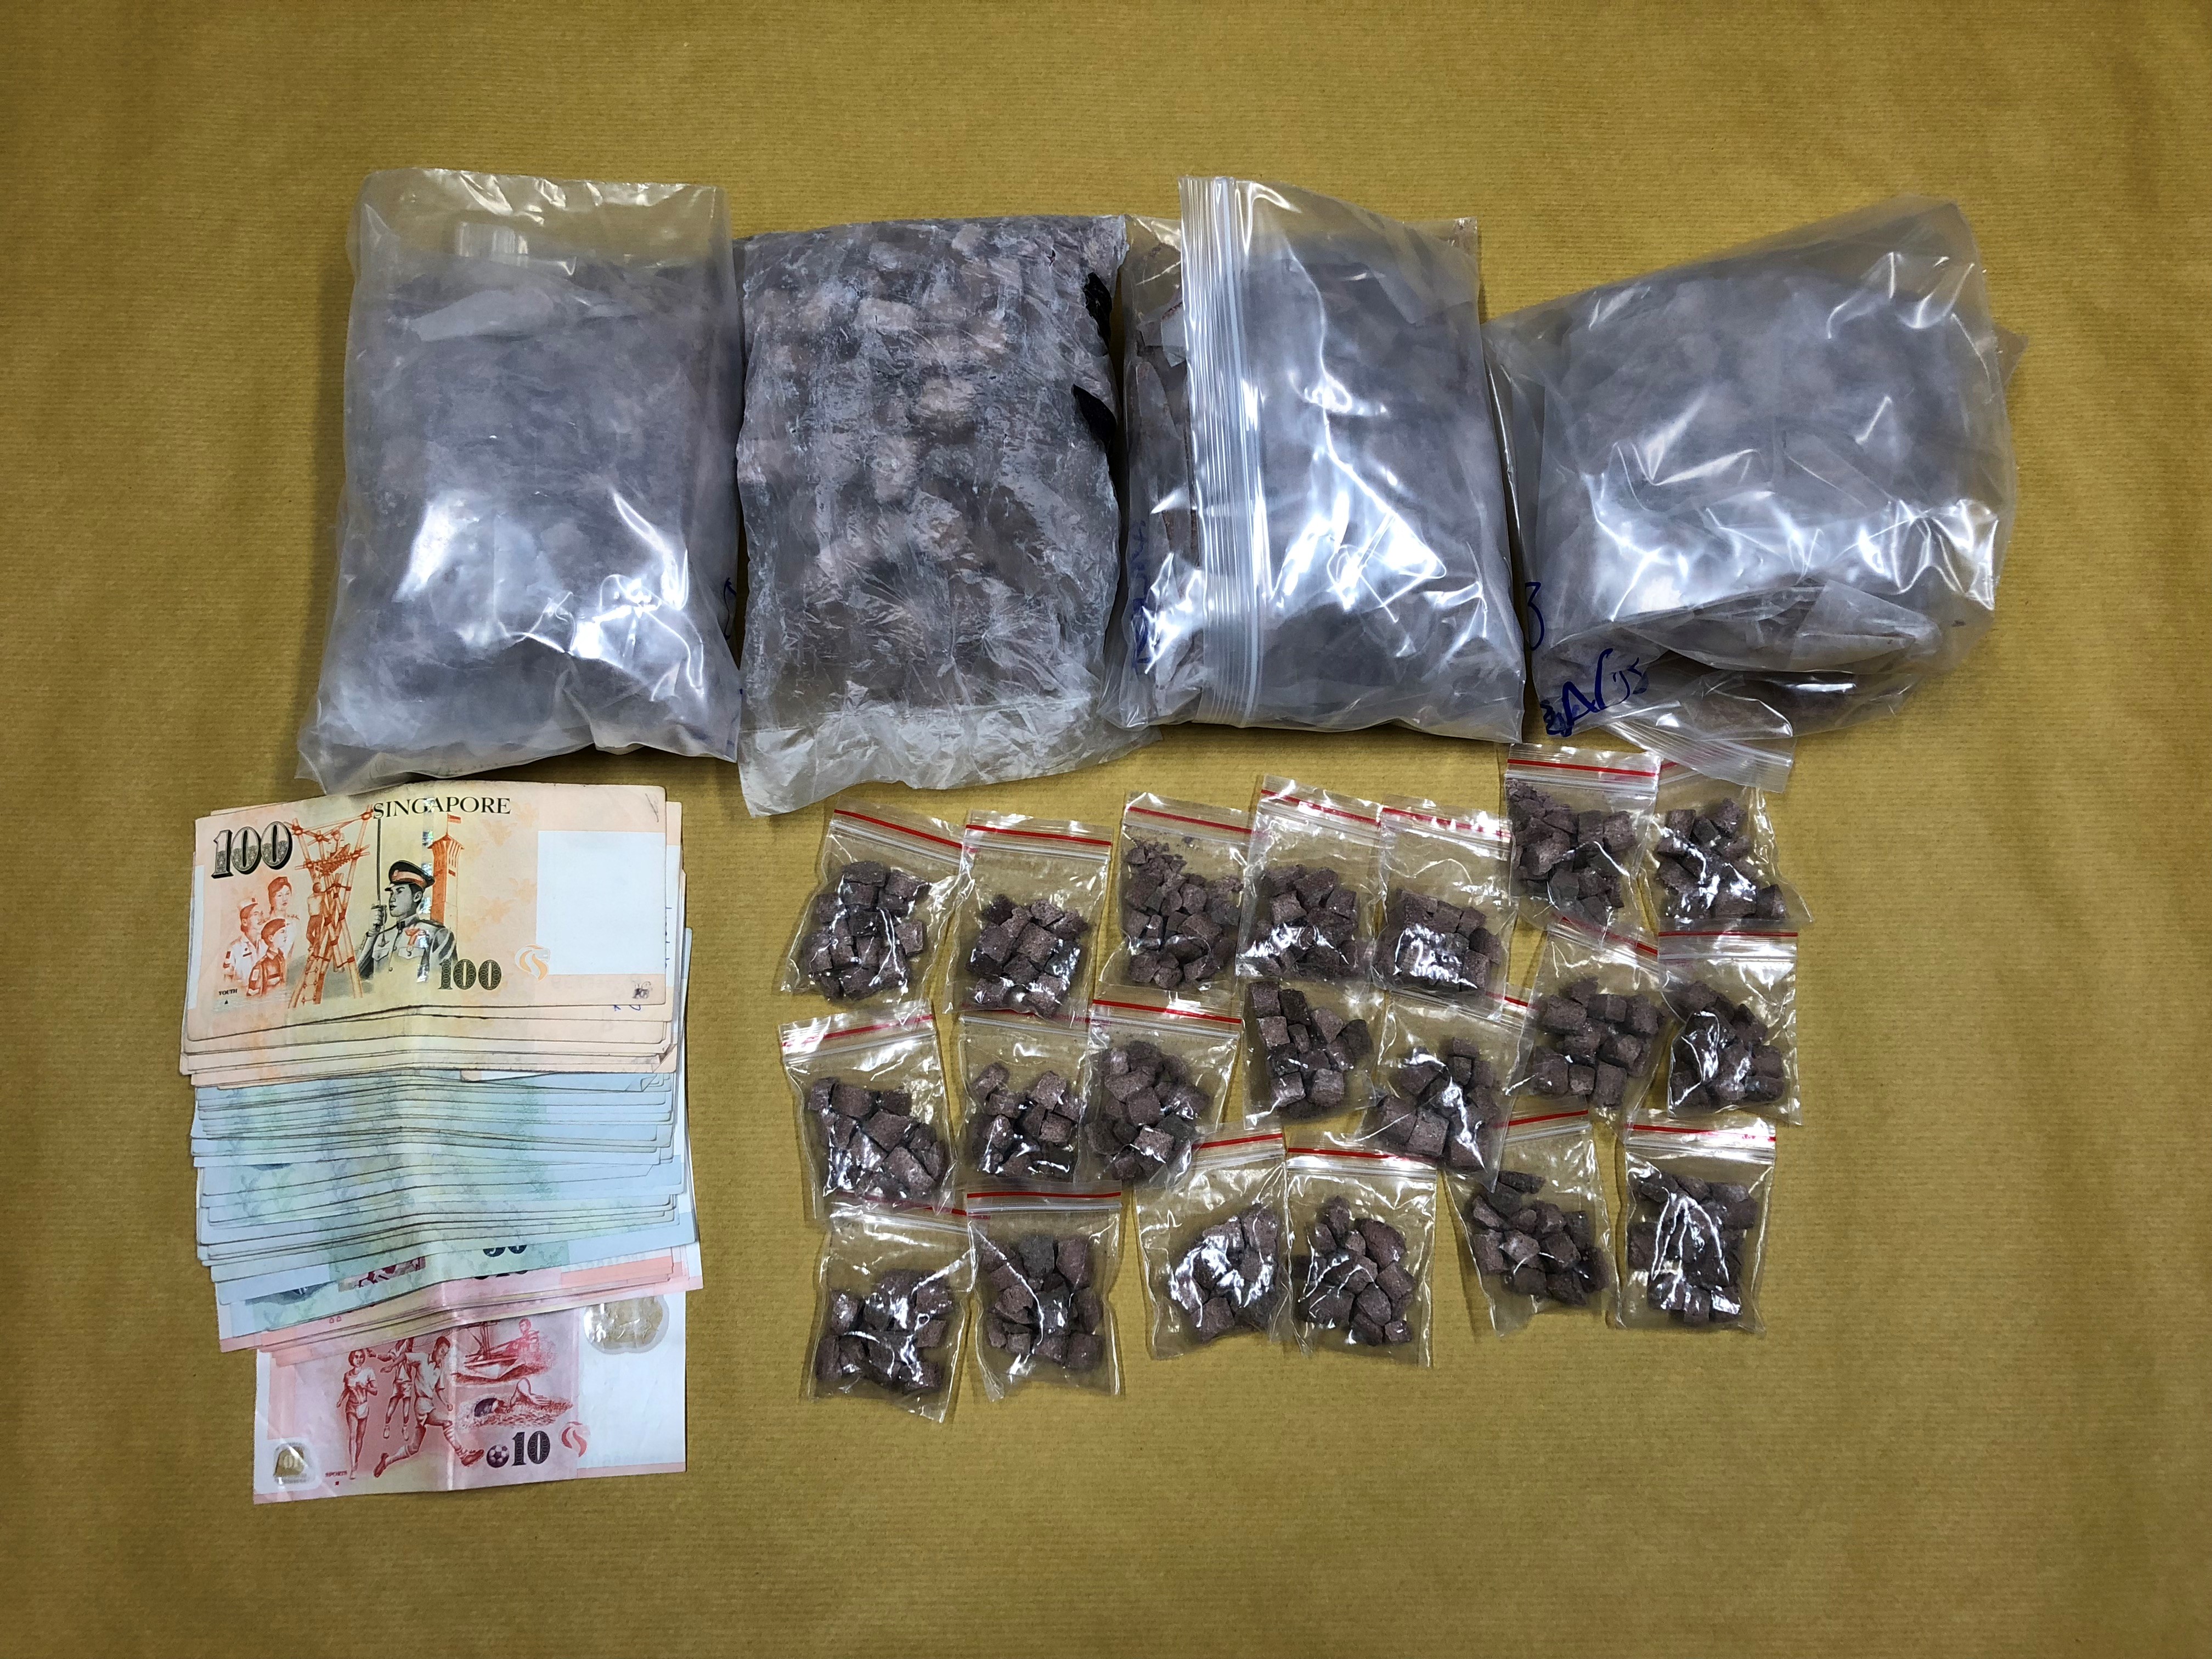 Heroin and cash recovered by SPF officers on 16 Aug 2018